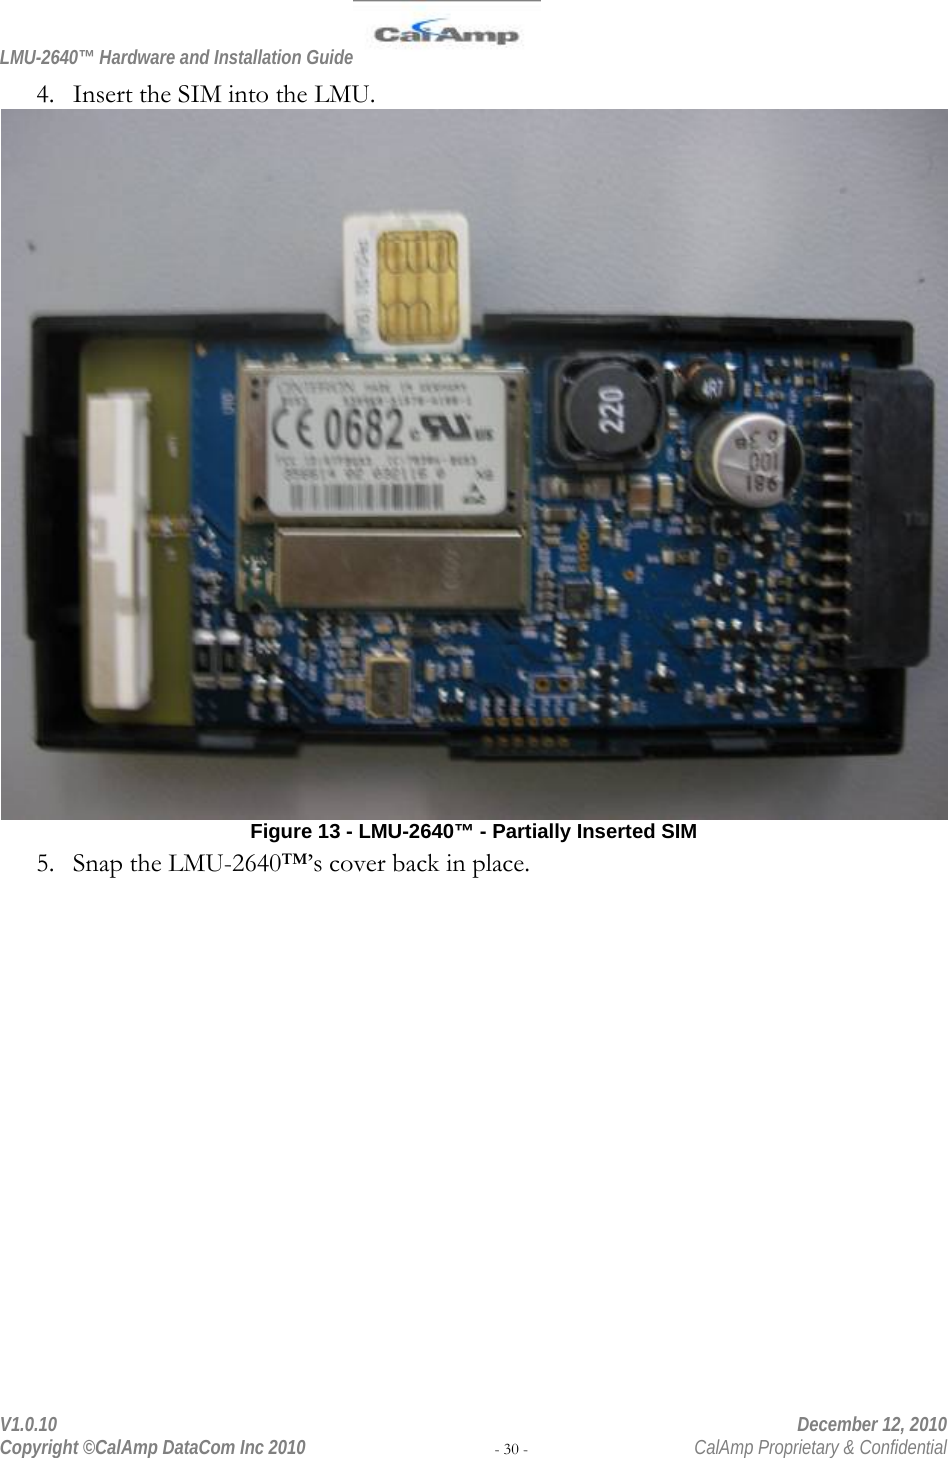 LMU-2640™ Hardware and Installation Guide  V1.0.10    December 12, 2010 Copyright ©CalAmp DataCom Inc 2010 - 30 -  CalAmp Proprietary &amp; Confidential 4. Insert the SIM into the LMU.  Figure 13 - LMU-2640™ - Partially Inserted SIM 5. Snap the LMU-2640™’s cover back in place. 